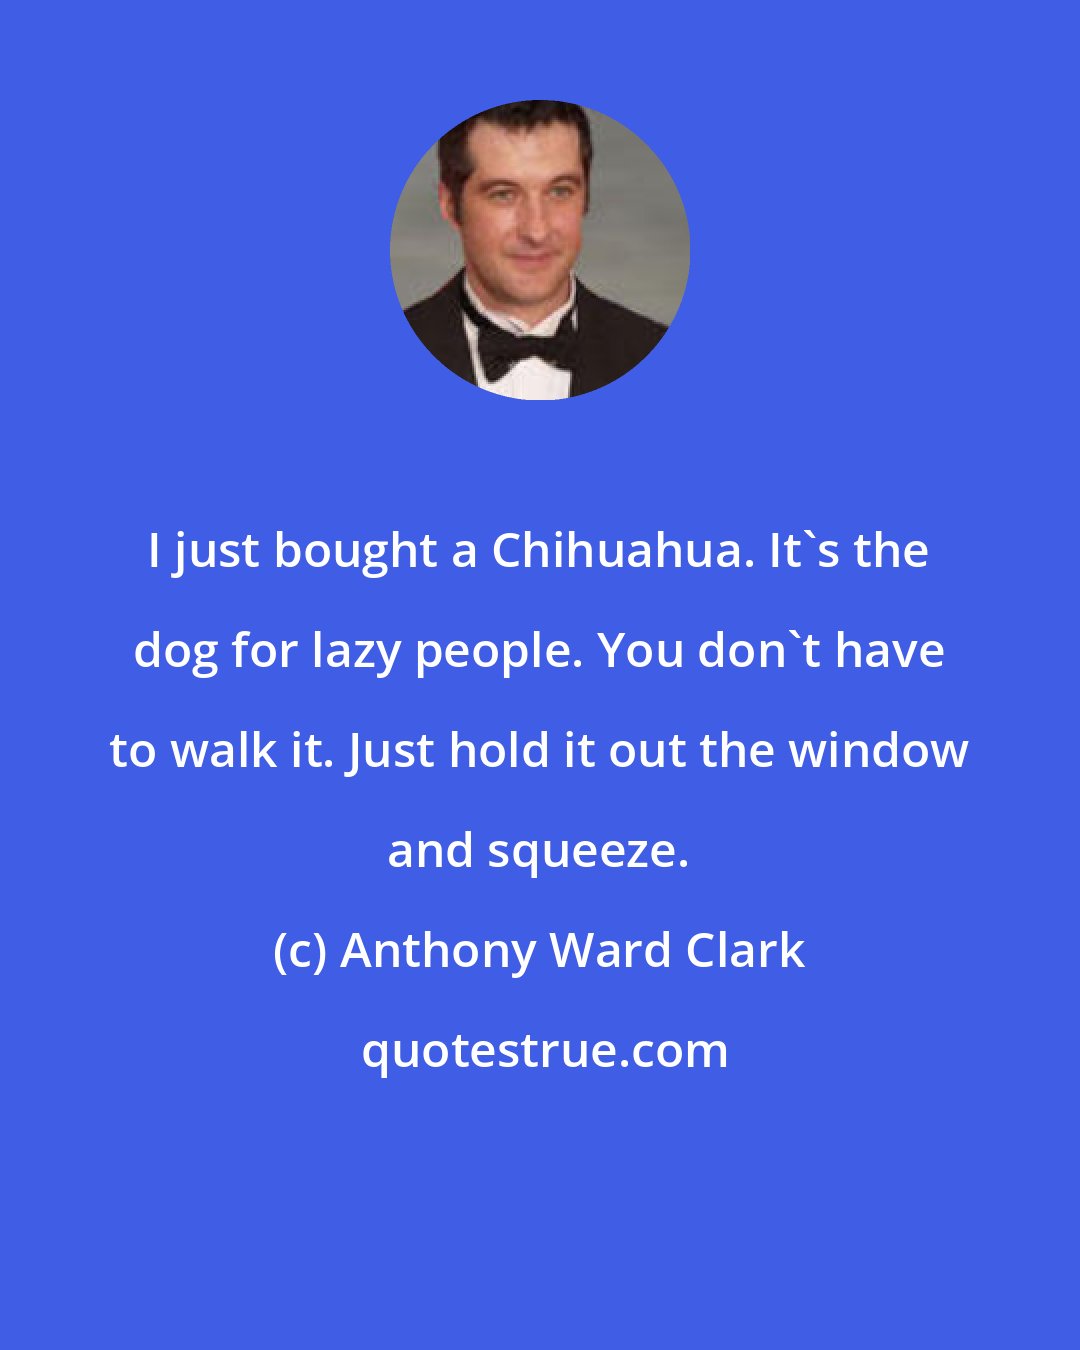 Anthony Ward Clark: I just bought a Chihuahua. It's the dog for lazy people. You don't have to walk it. Just hold it out the window and squeeze.